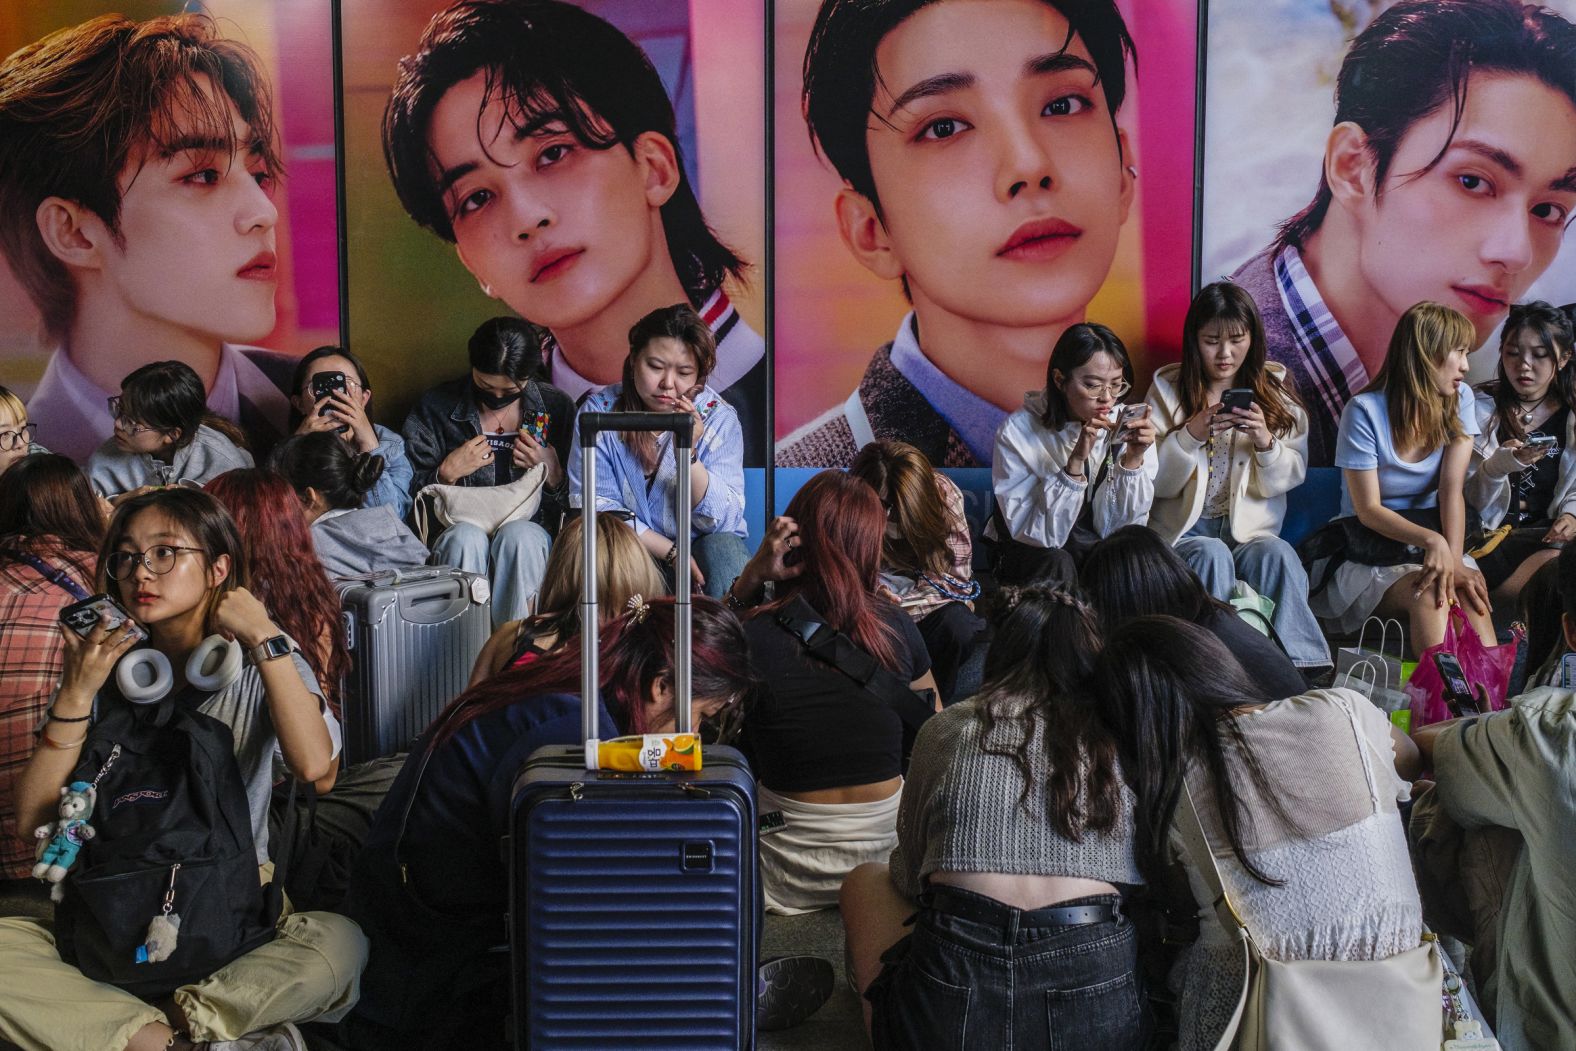 Fans line up to buy the new album "17 is Right Here" by South Korean boy band Seventeen outside a convenience store in Seoul, South Korea, on Monday, April 29.